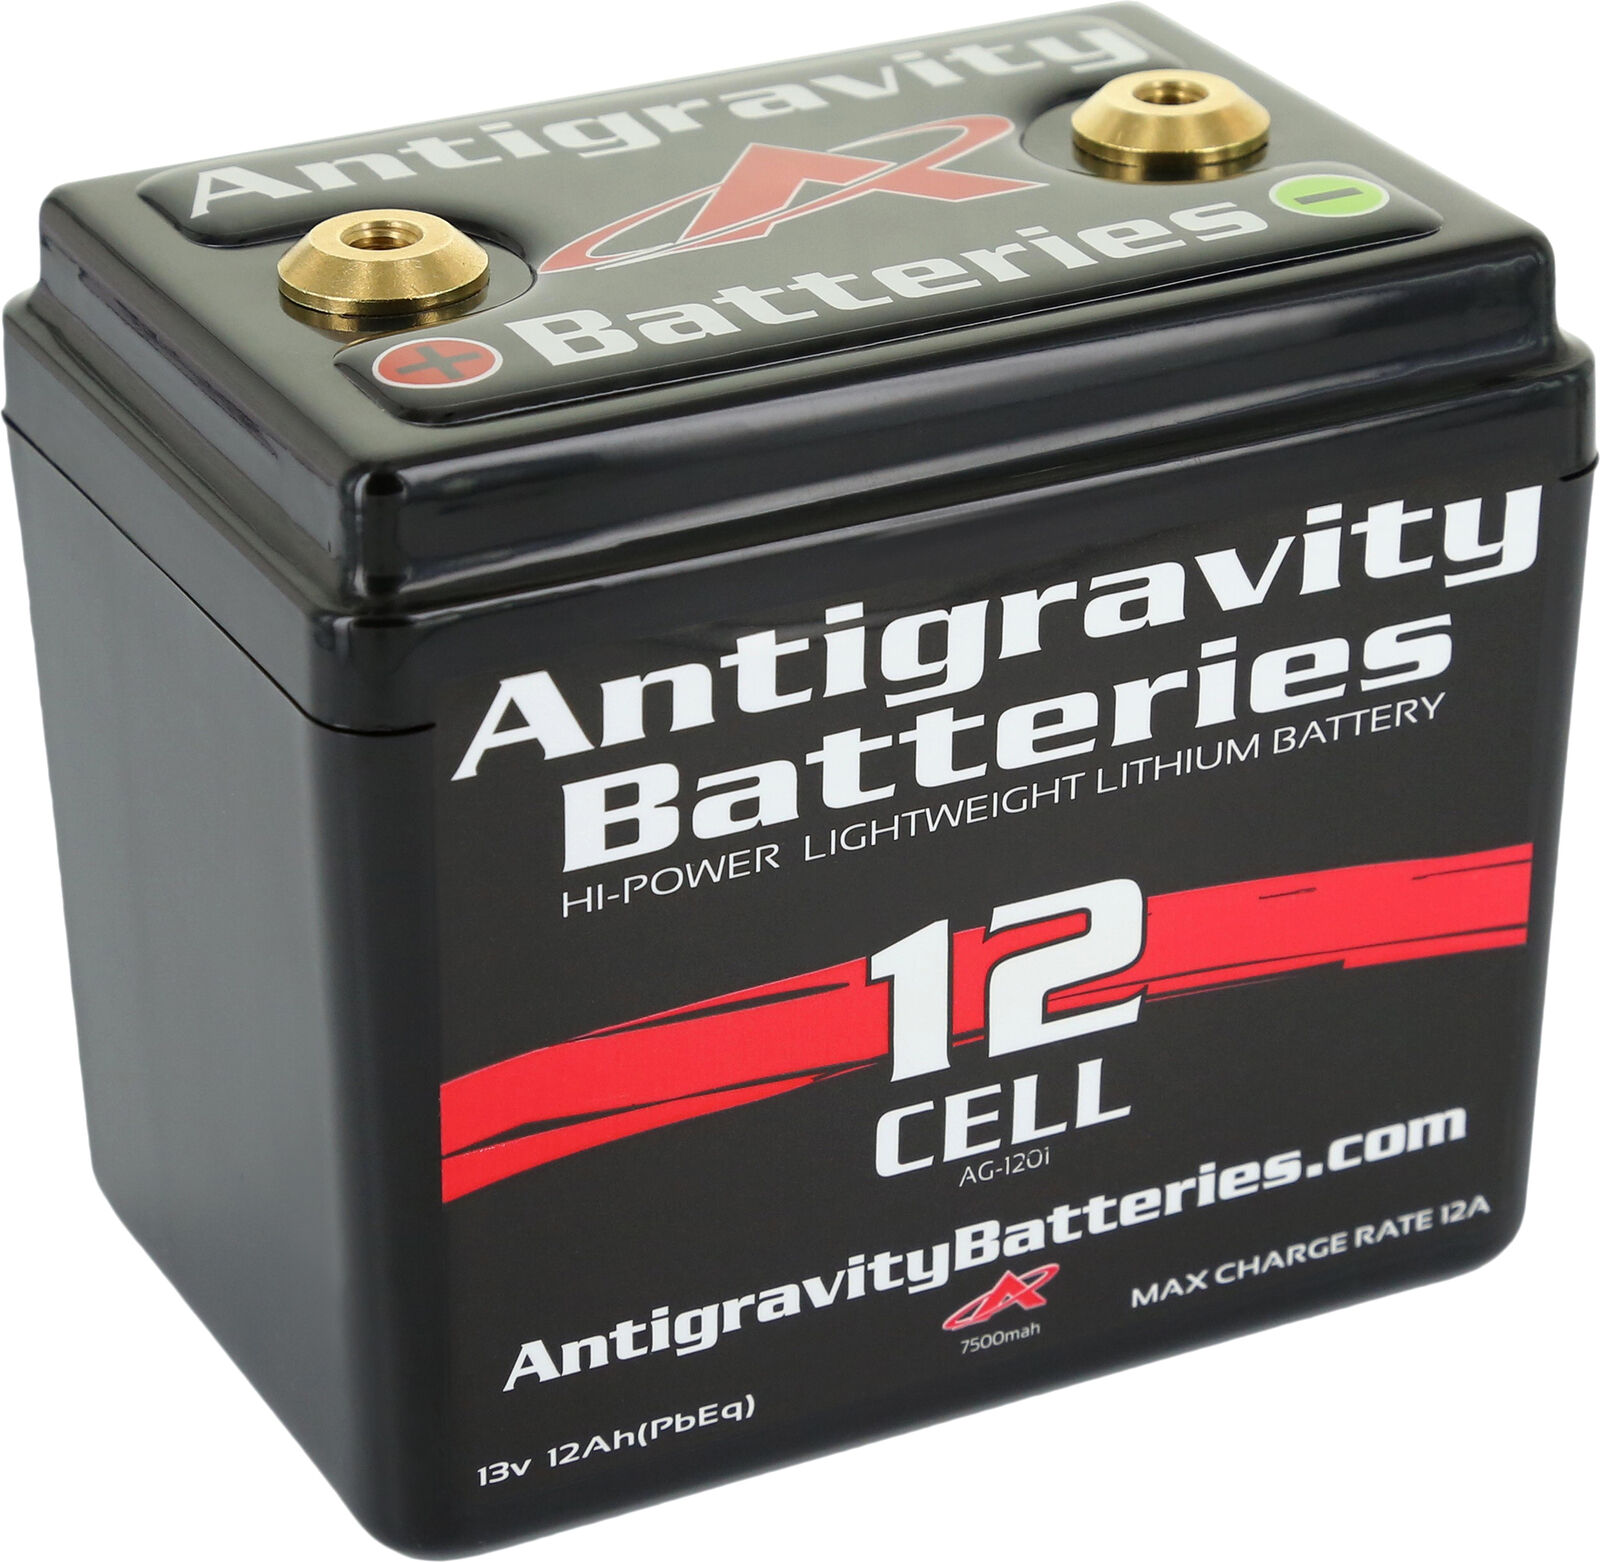 Small Case Lithium Ion Battery AG-1201 360 CA Antigravity